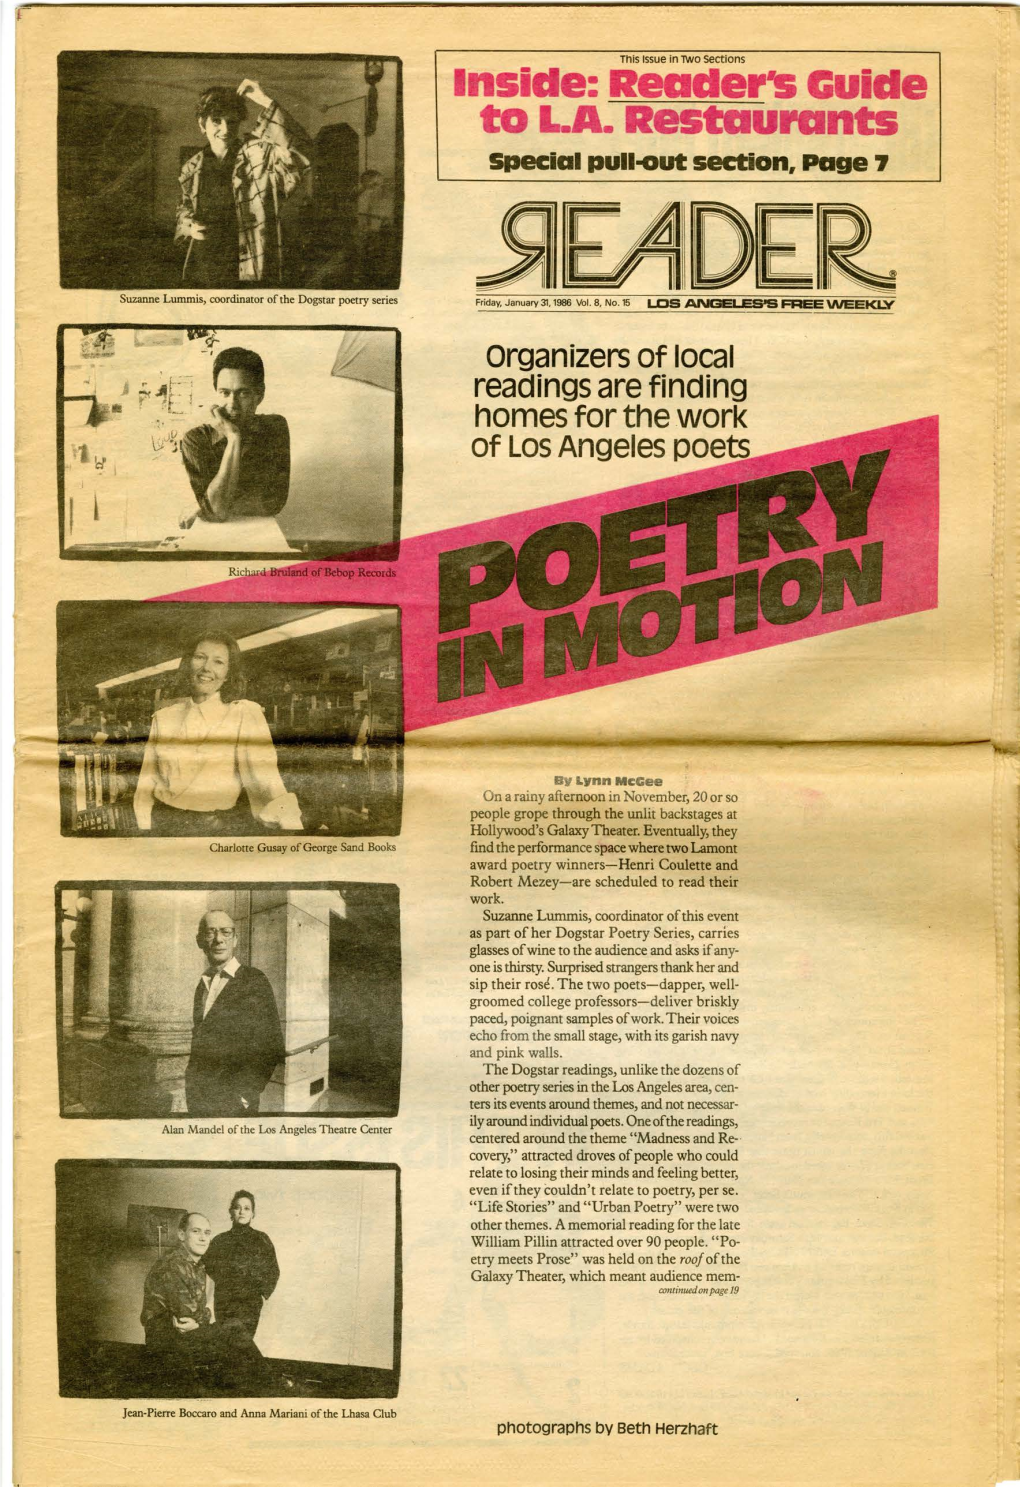 Reader's Guide, Vol. 8 No.15, 1986, January 31